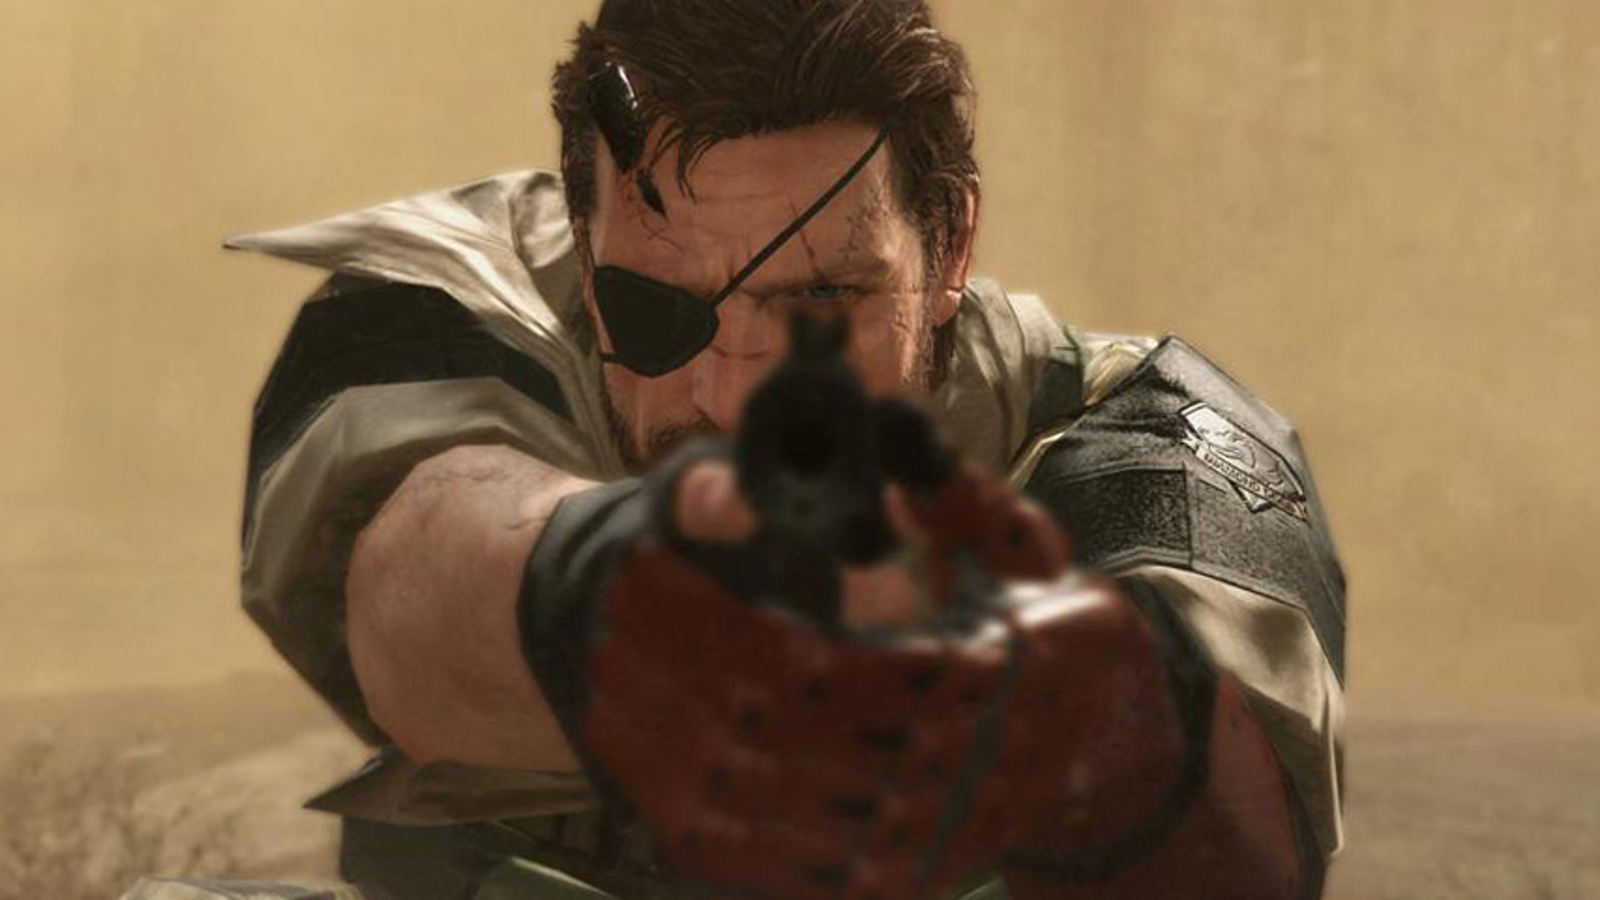 Metal Gear Solid 5: The Phantom Pain — Thoughts from the first 40